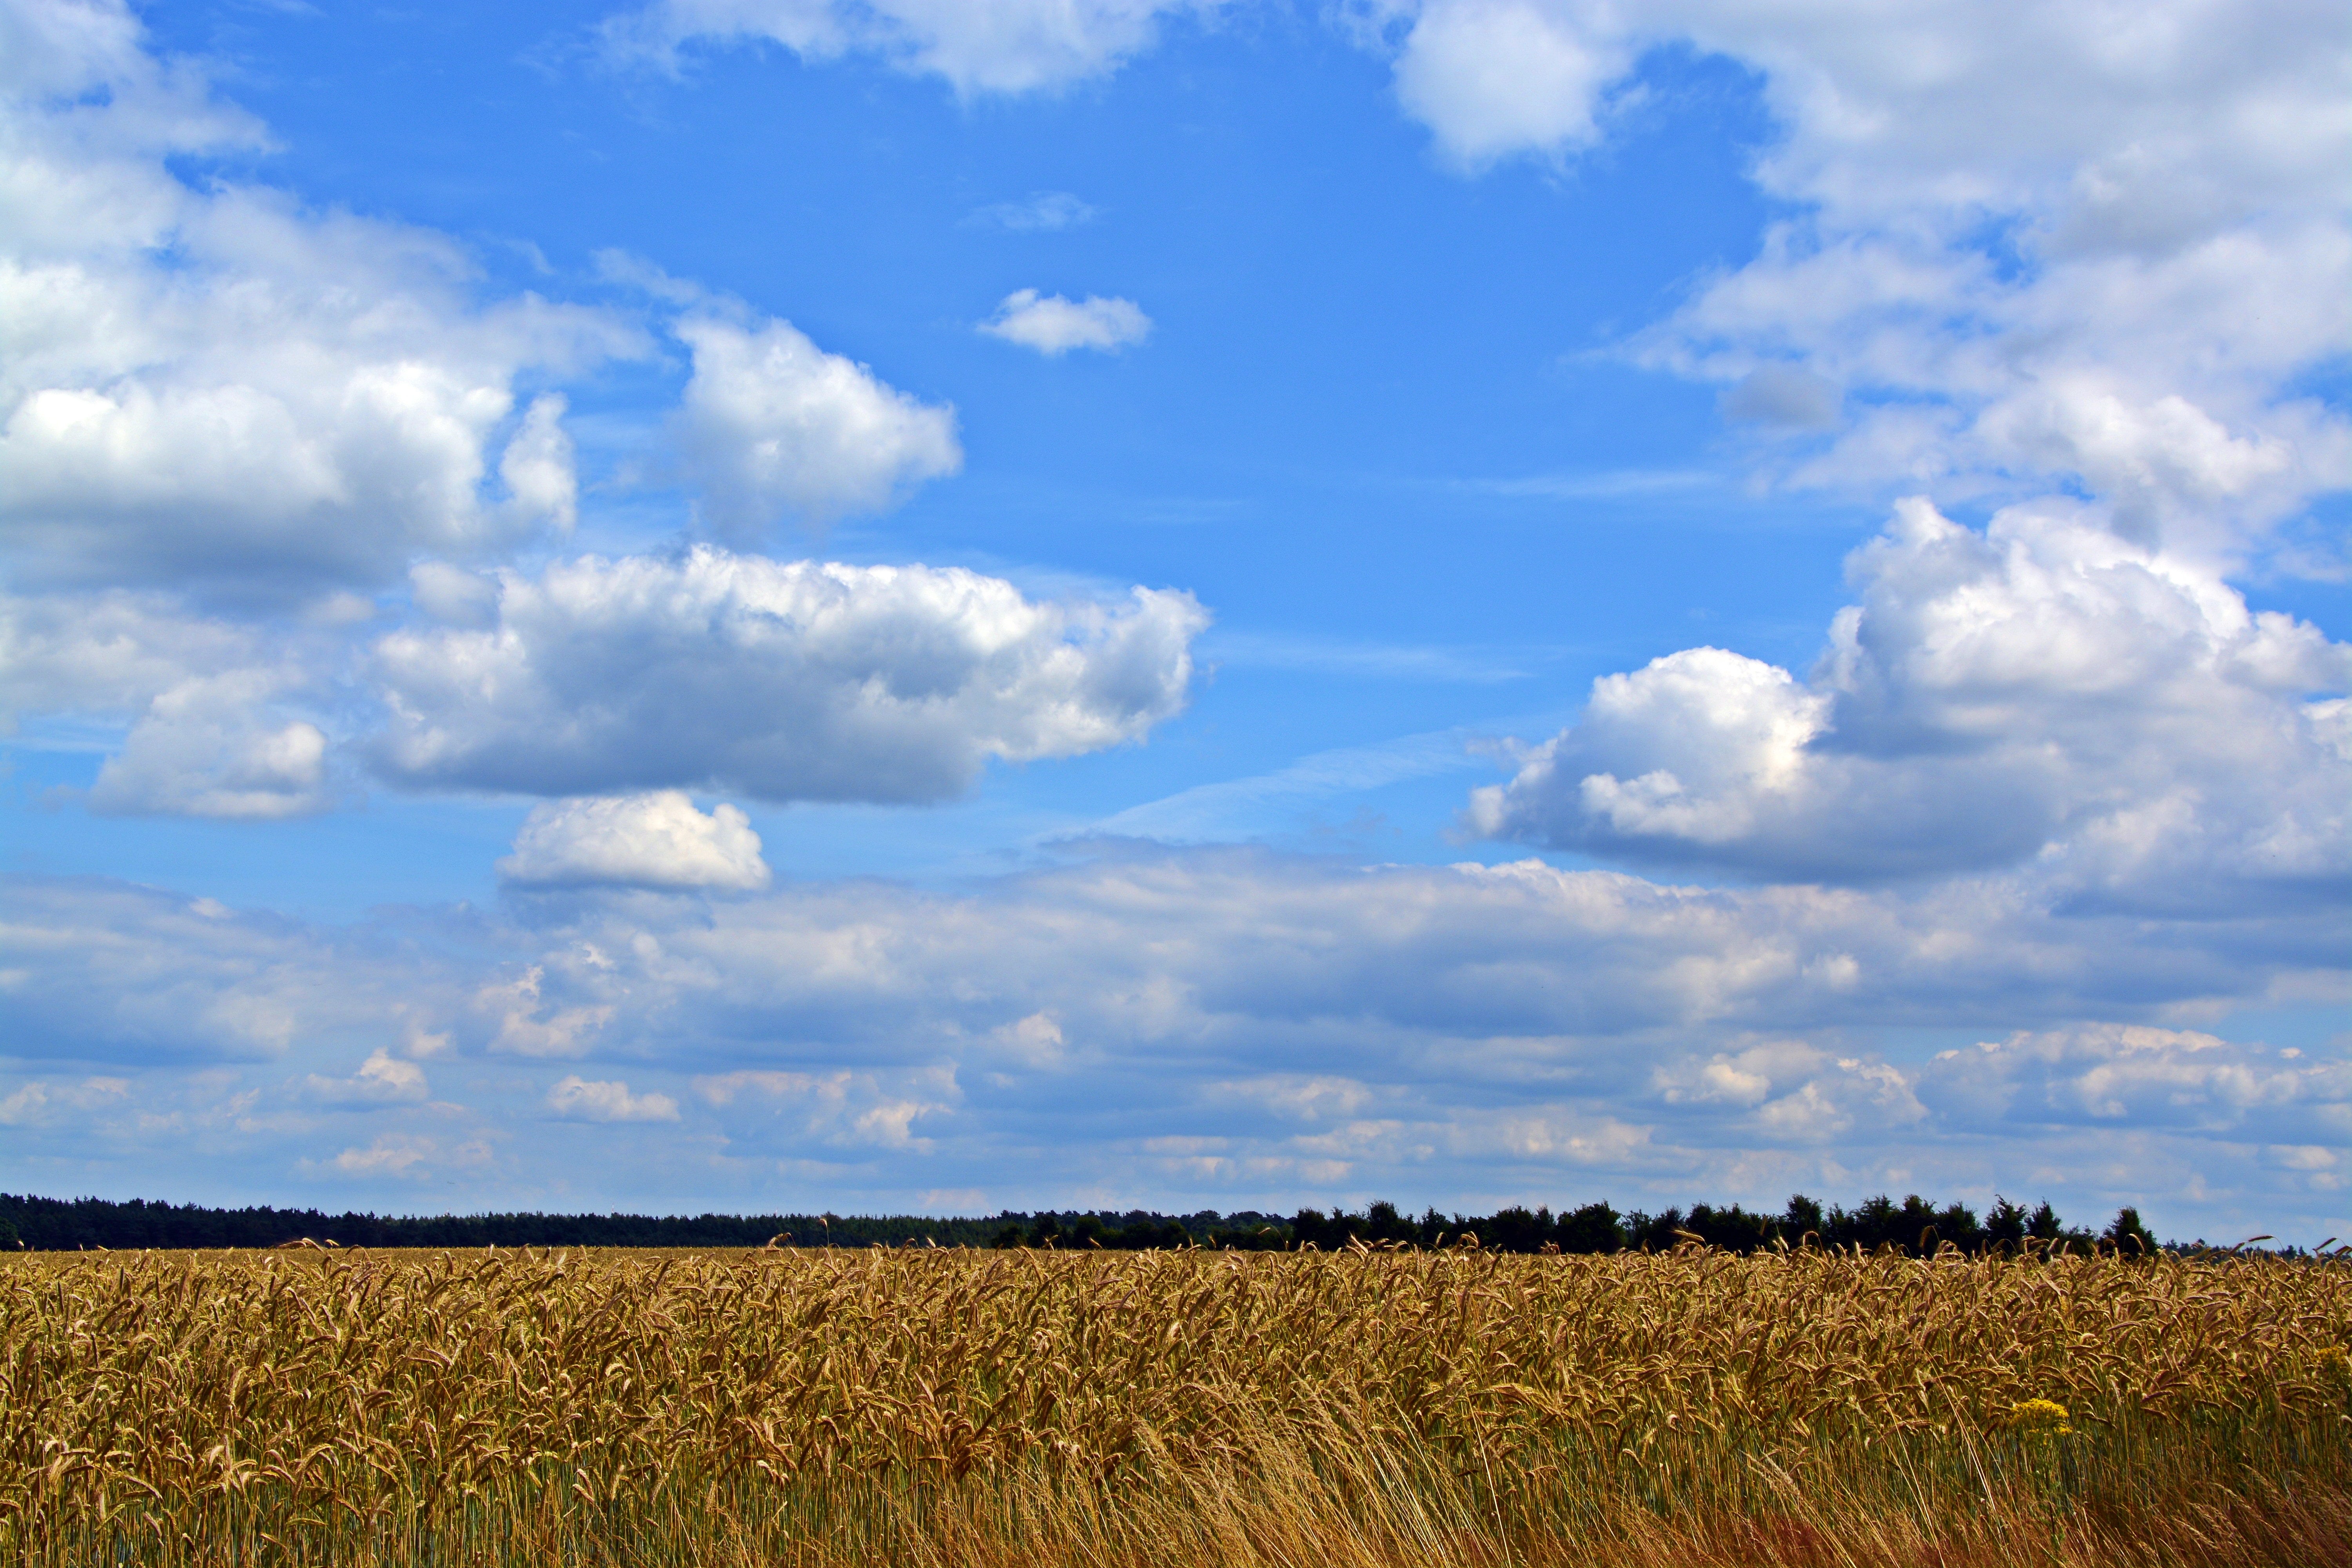 Landscape, Sky, Clouds, Cereals, Field, agriculture, field